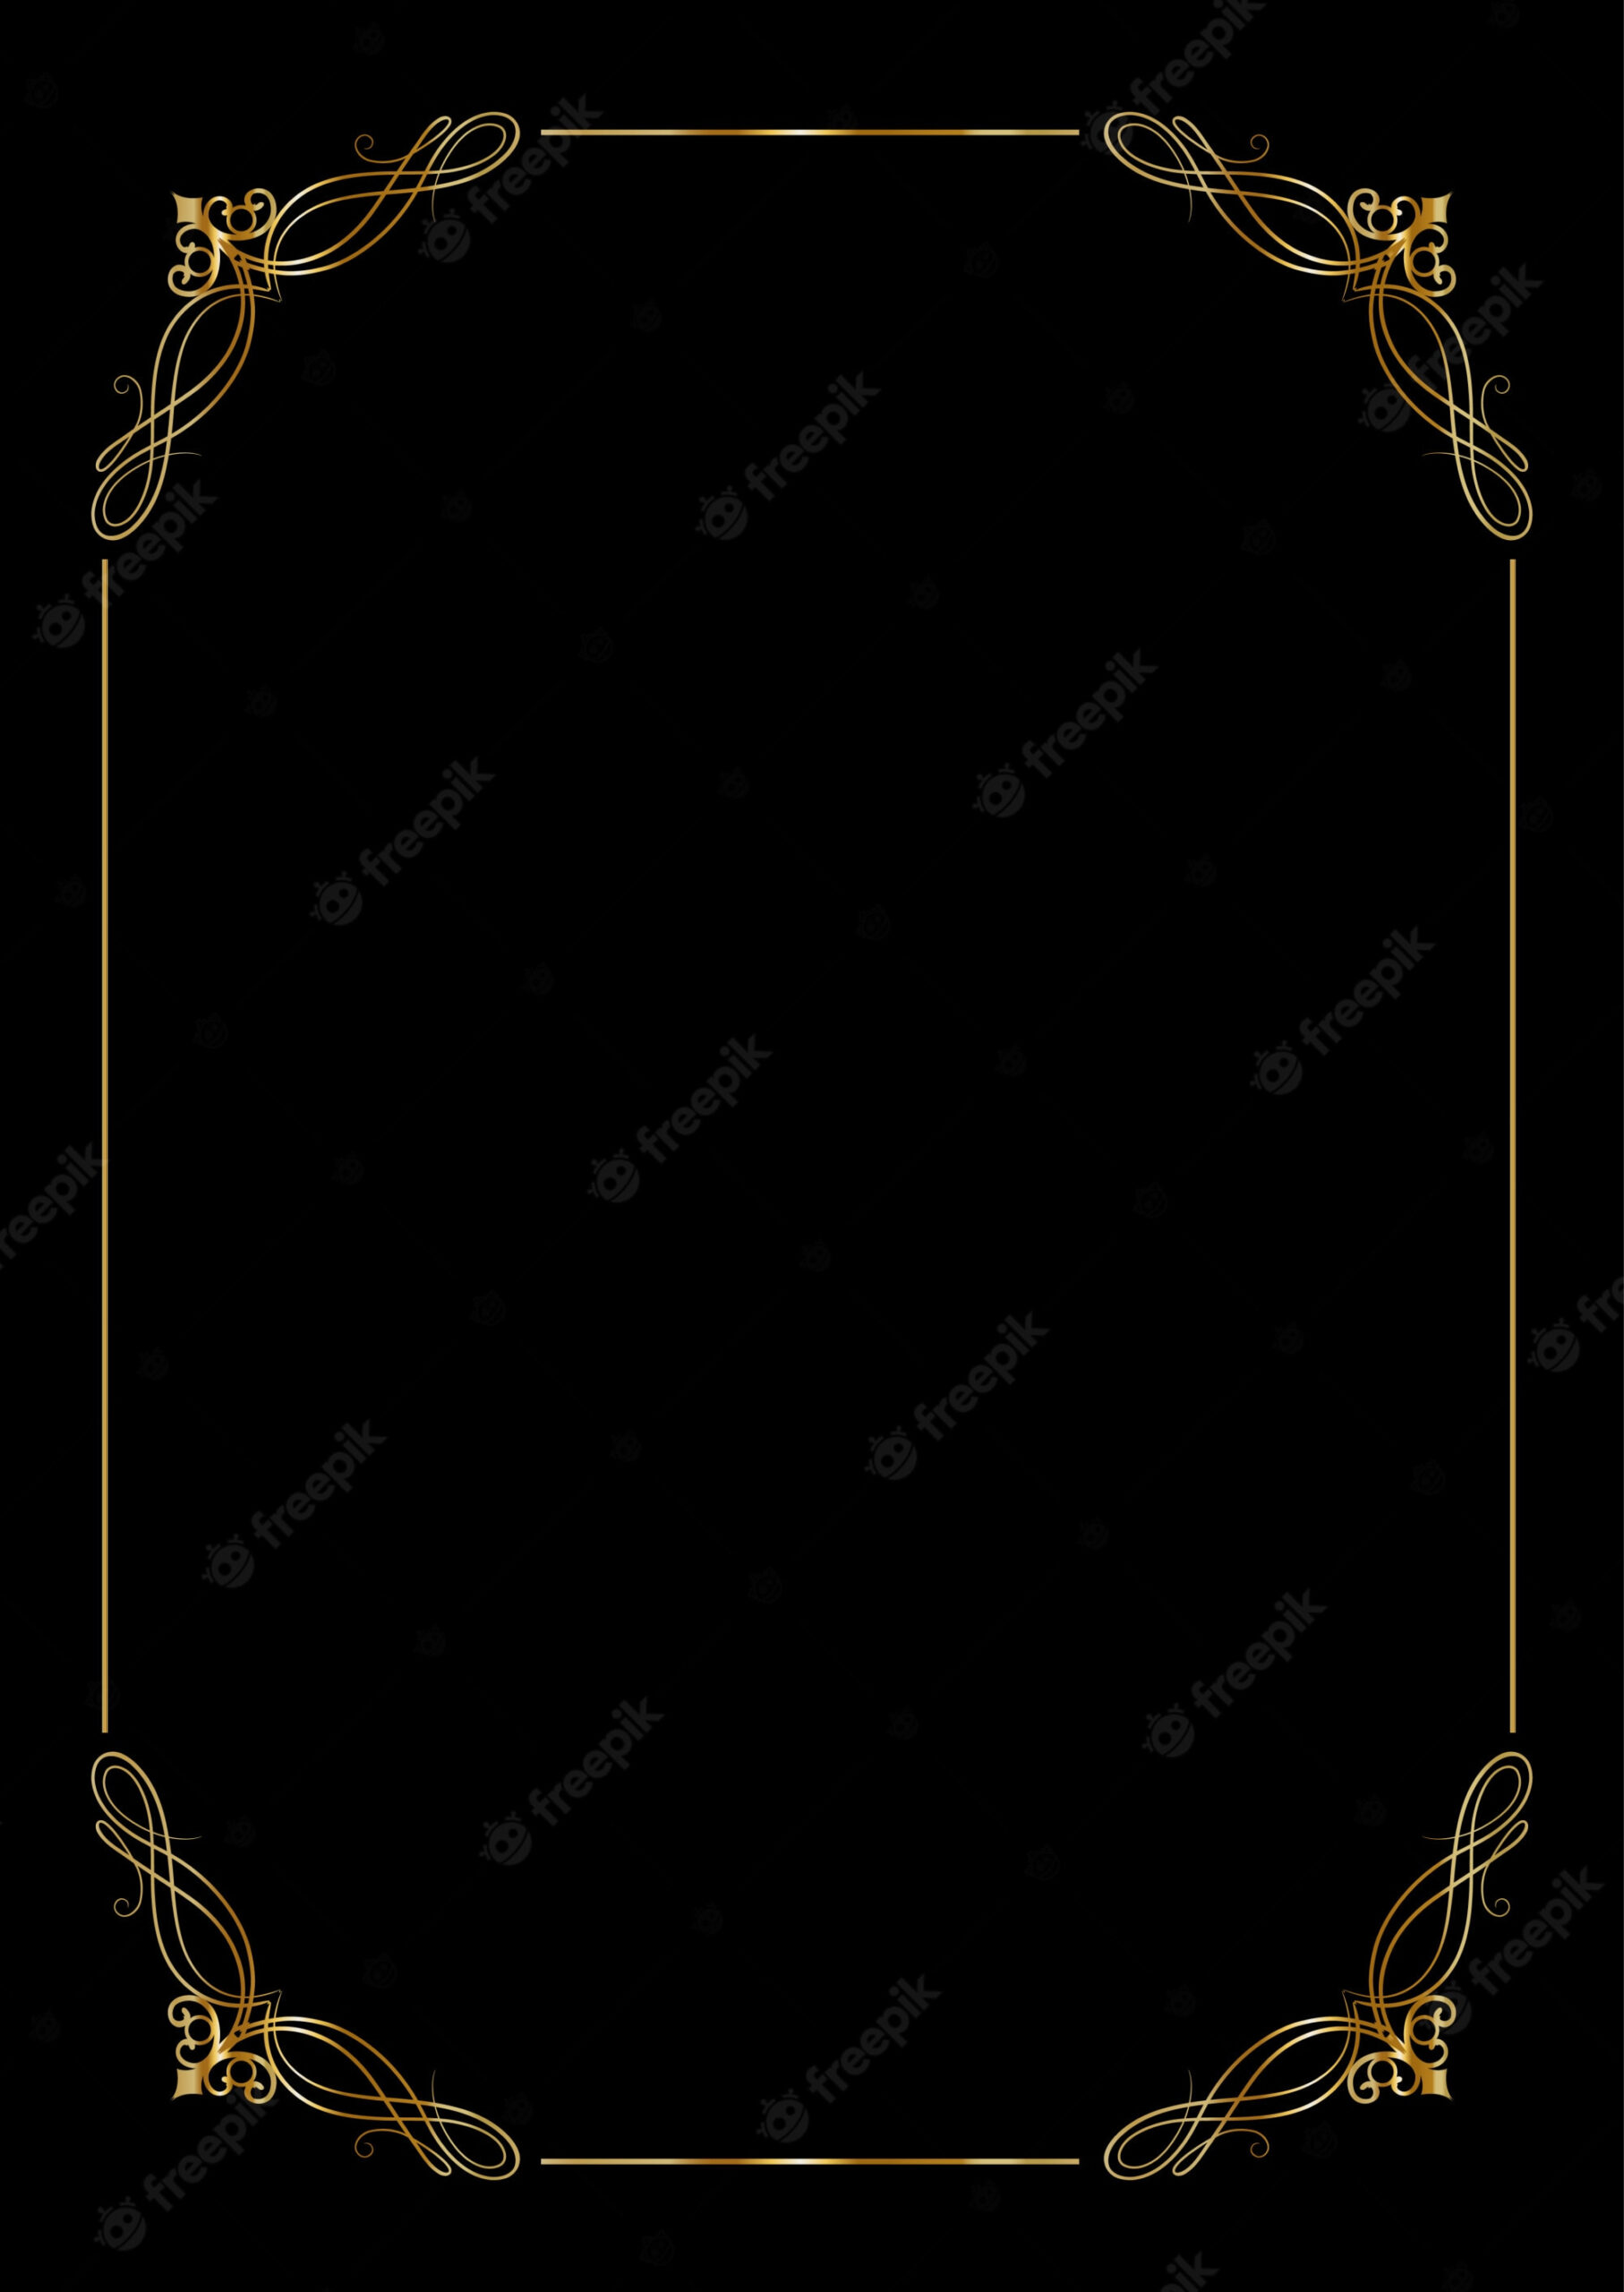 Black Gold Invitation Images  Free Vectors, Stock Photos & PSD Within Blank Templates For Invitations